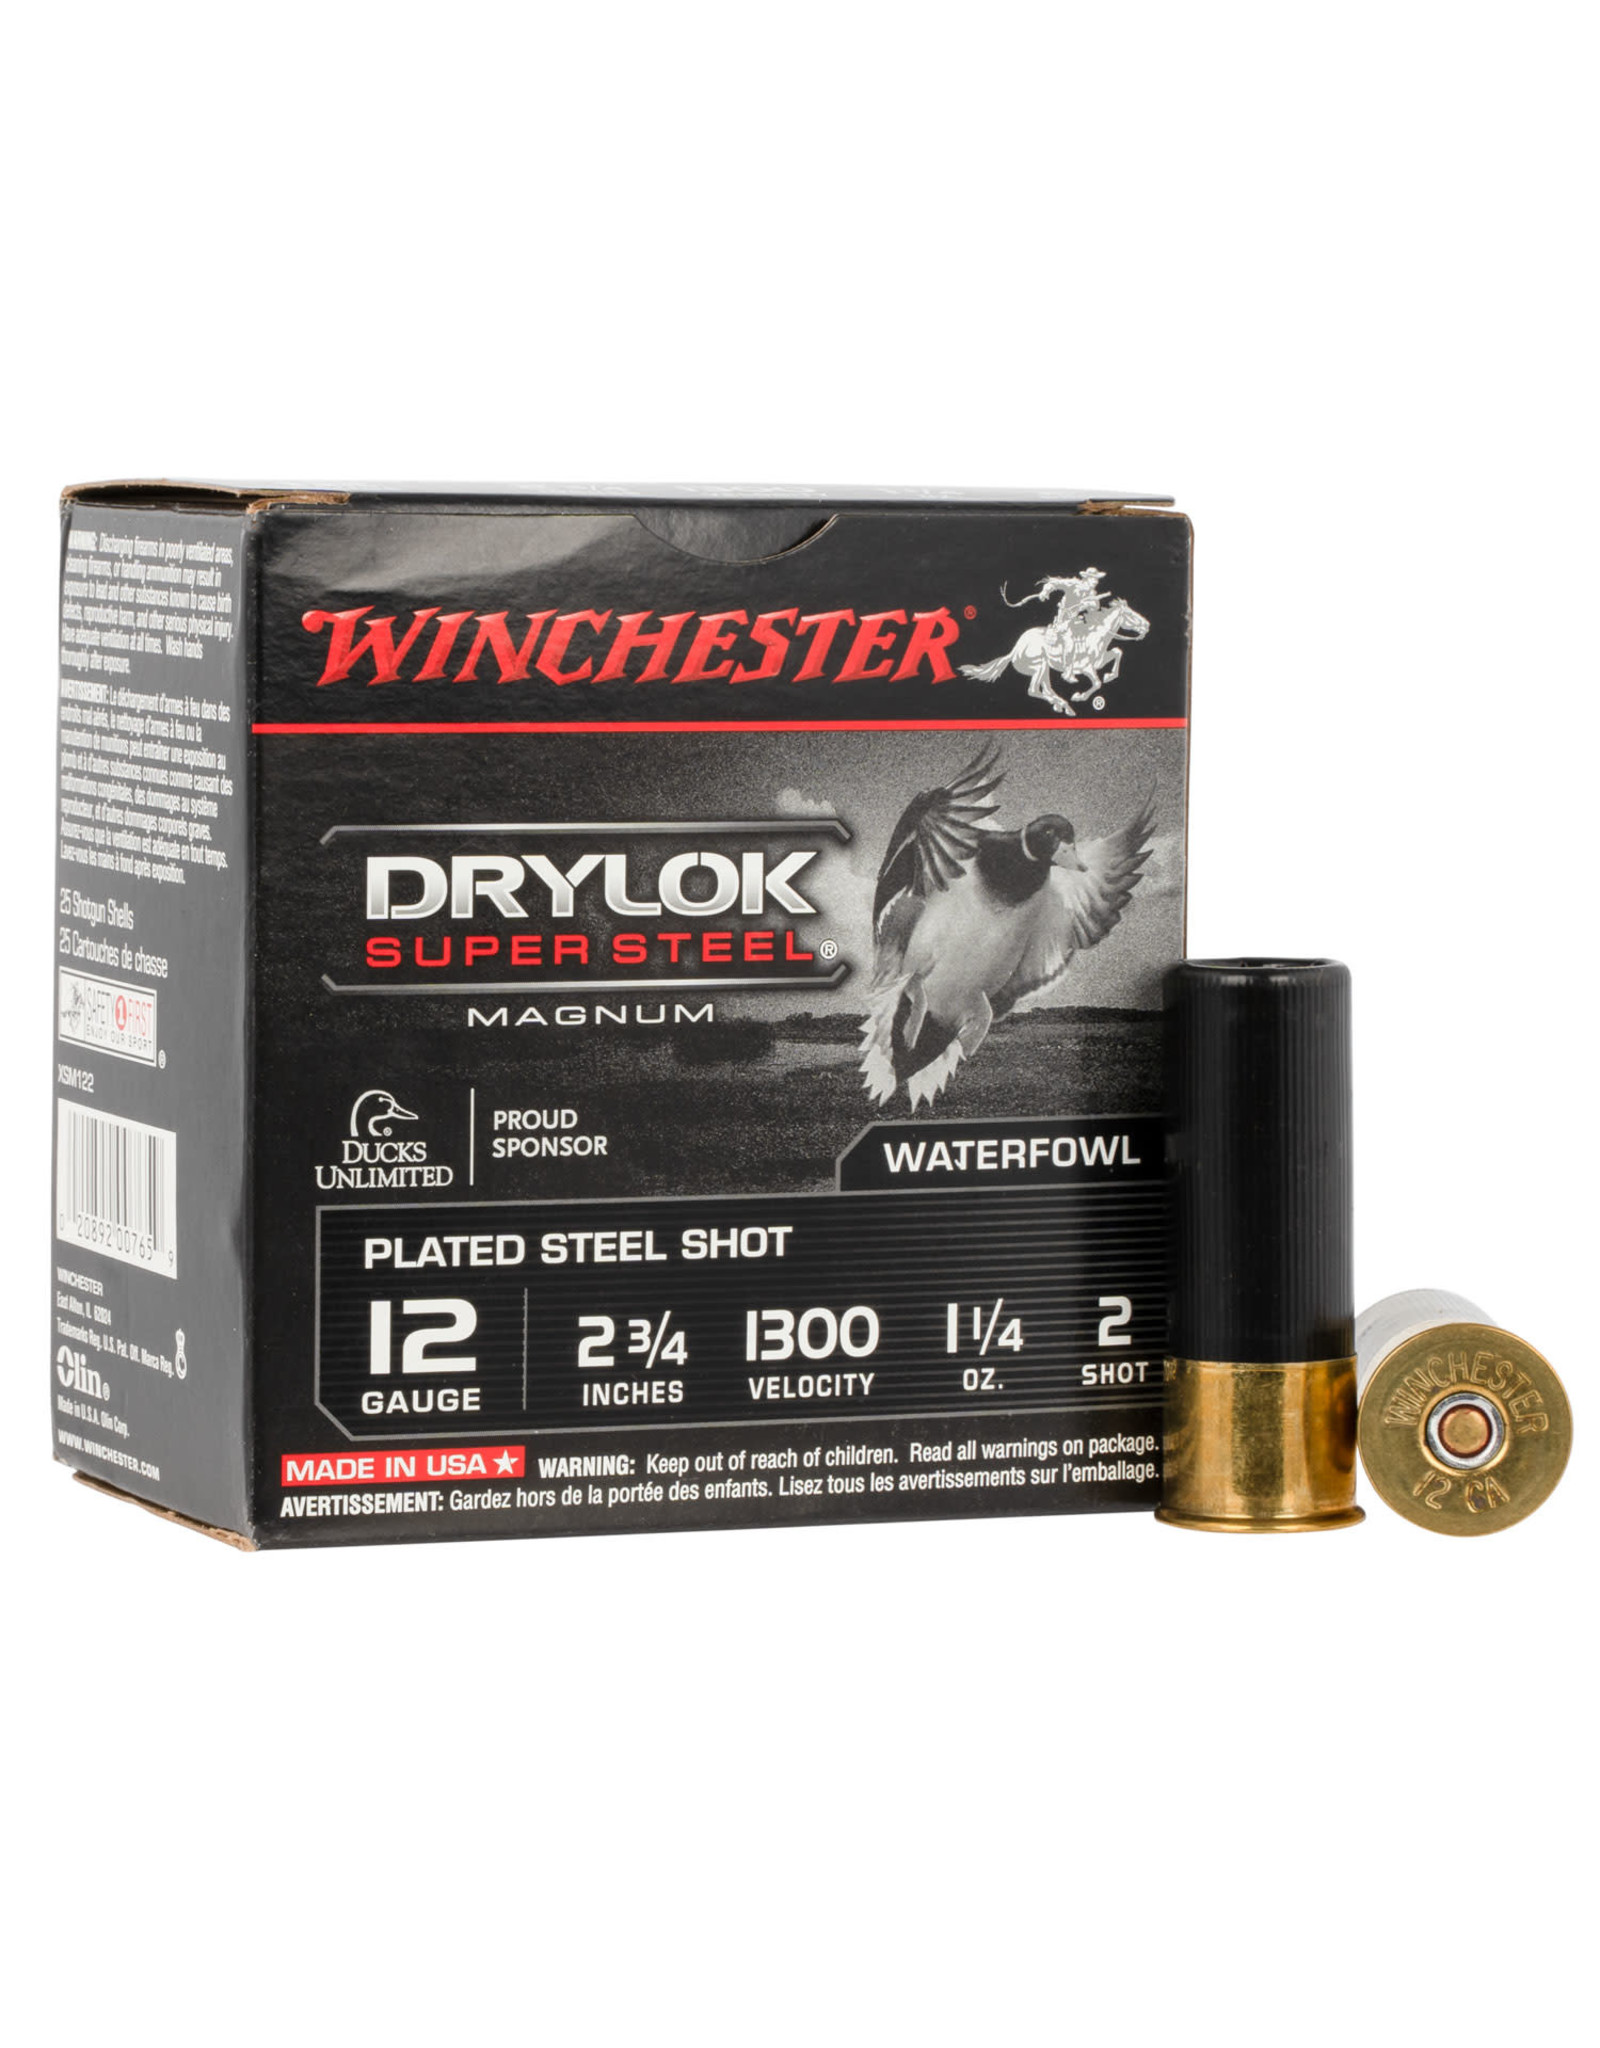 WINCHESTER AMMO Winchester Dry Lok Super Steel 12 Ga 2-3/4" 1-1/4 Oz #2 1300 FPS - 25 Count